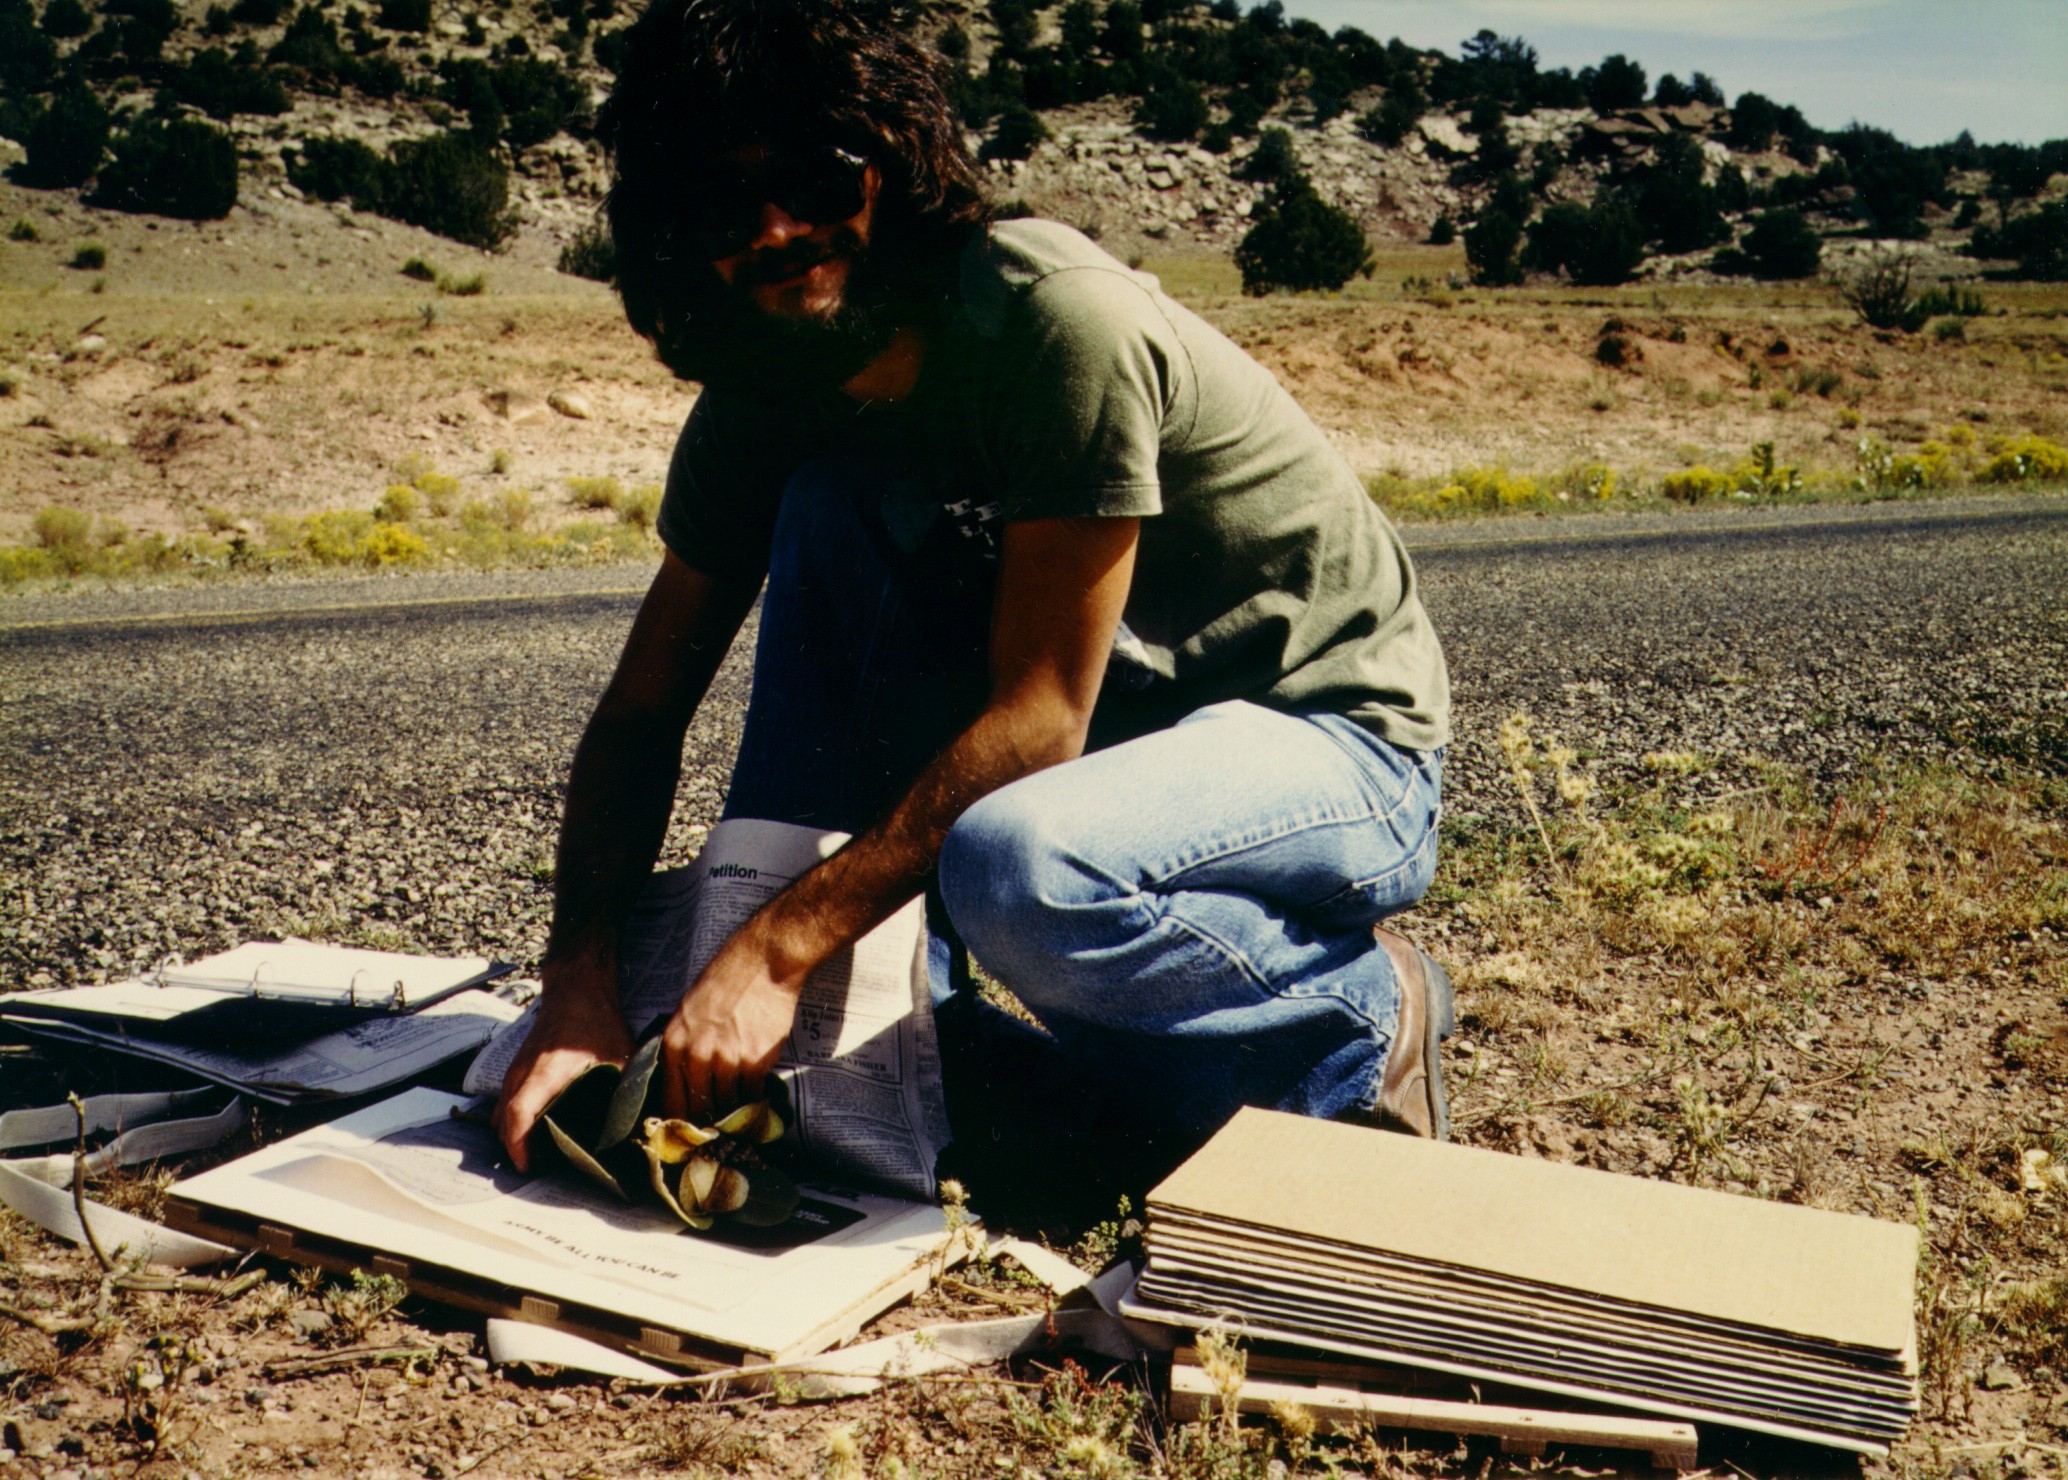 I'm pressing a milkweed I collected near El Cerrito, N.M., in the fall of 1983